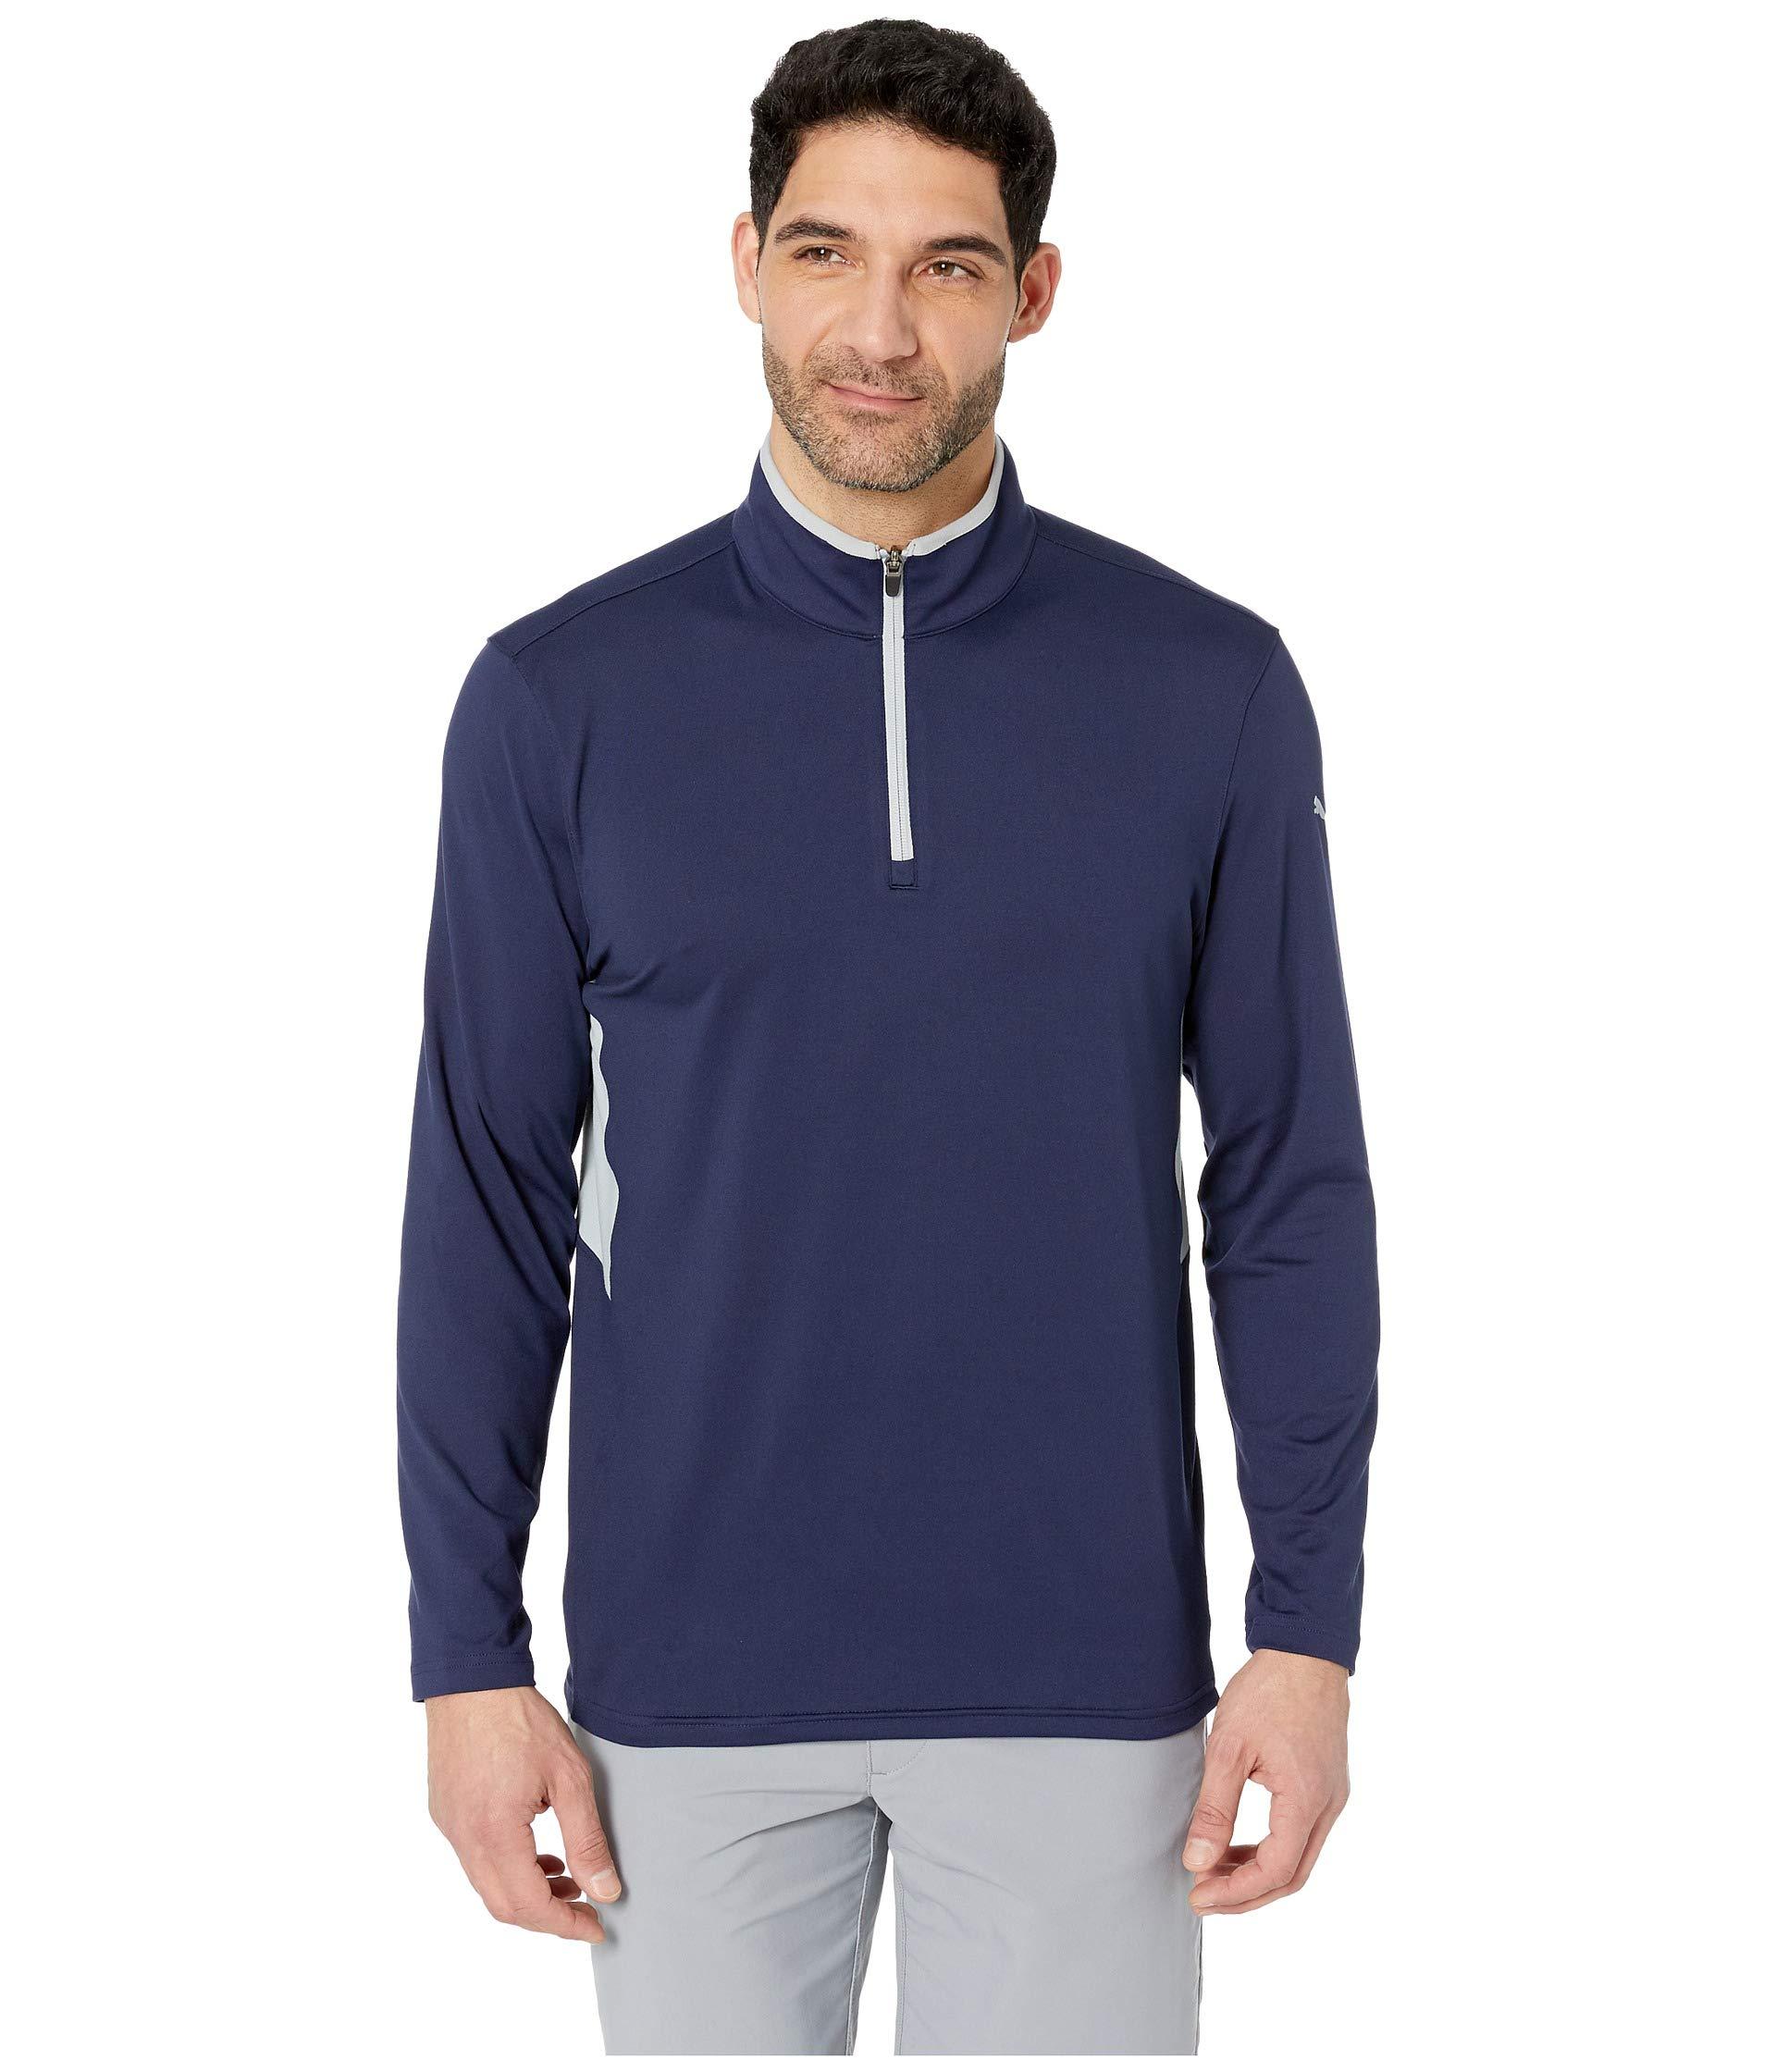 PUMA Synthetic Rotation 1/4 Zip in 04 (Blue) for Men - Lyst